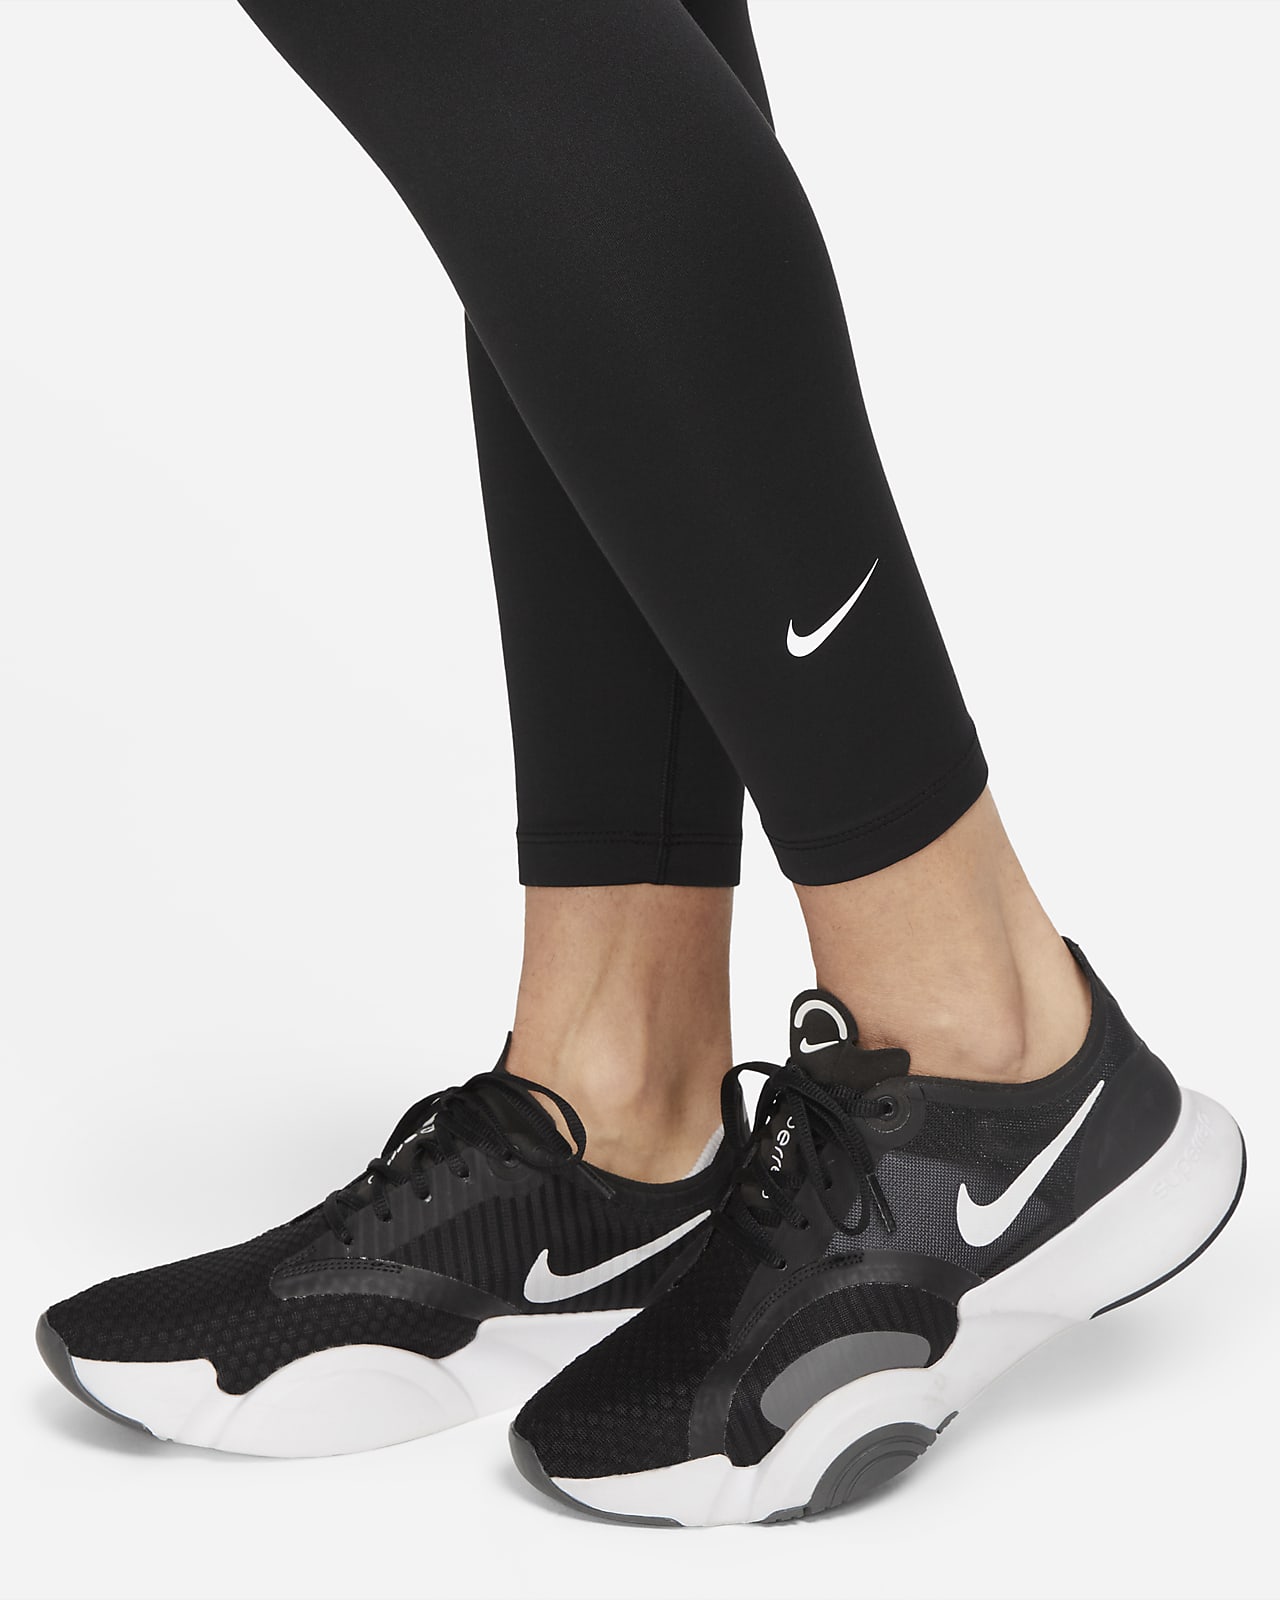 One Women\'s Therma-FIT Nike 7/8 High-Waisted Leggings.